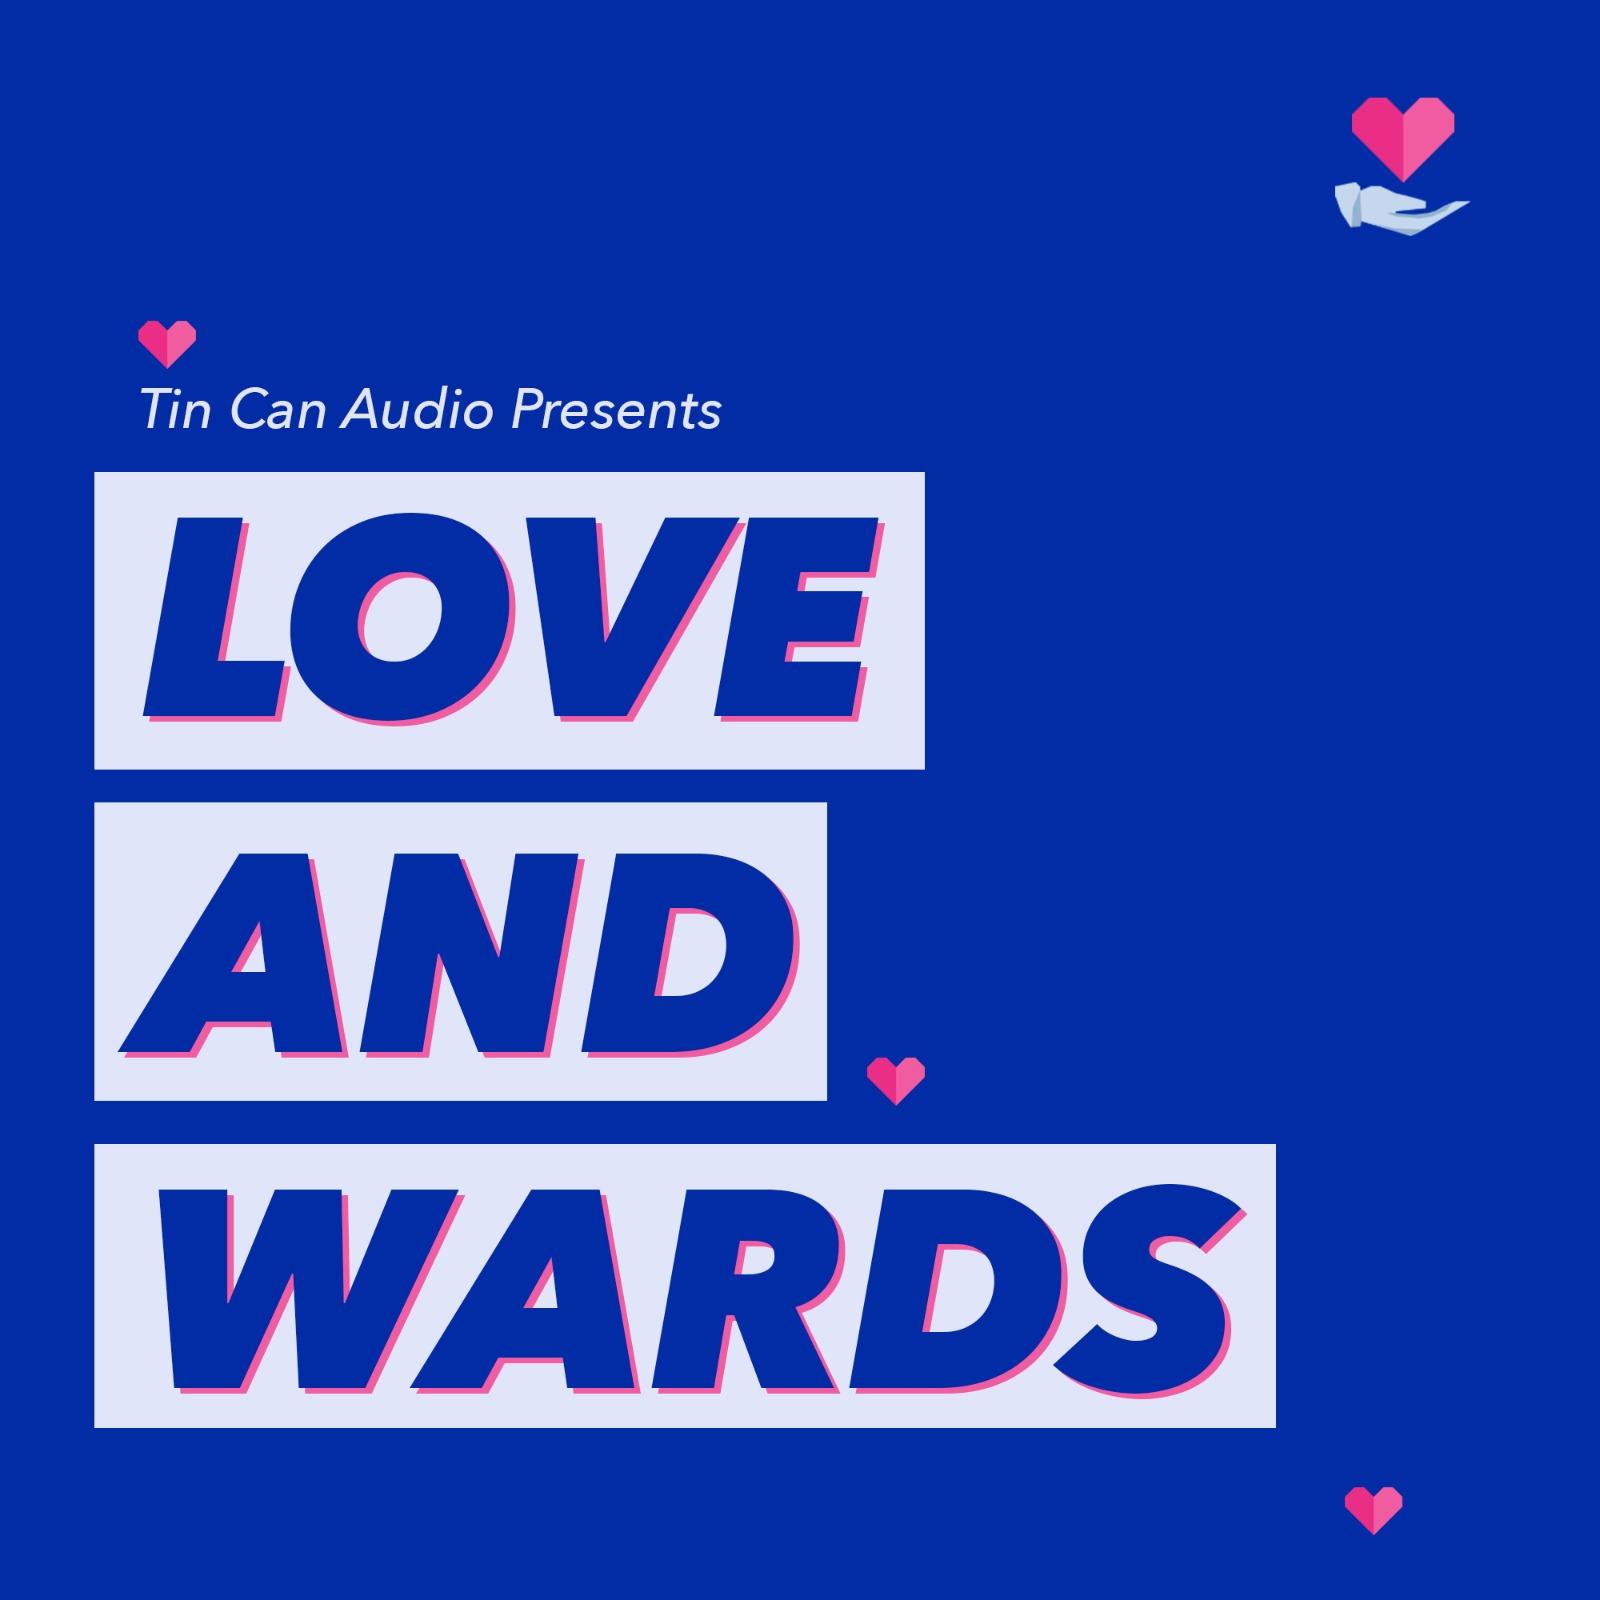 6 - Then & Now (Part 2) - Love & Wards